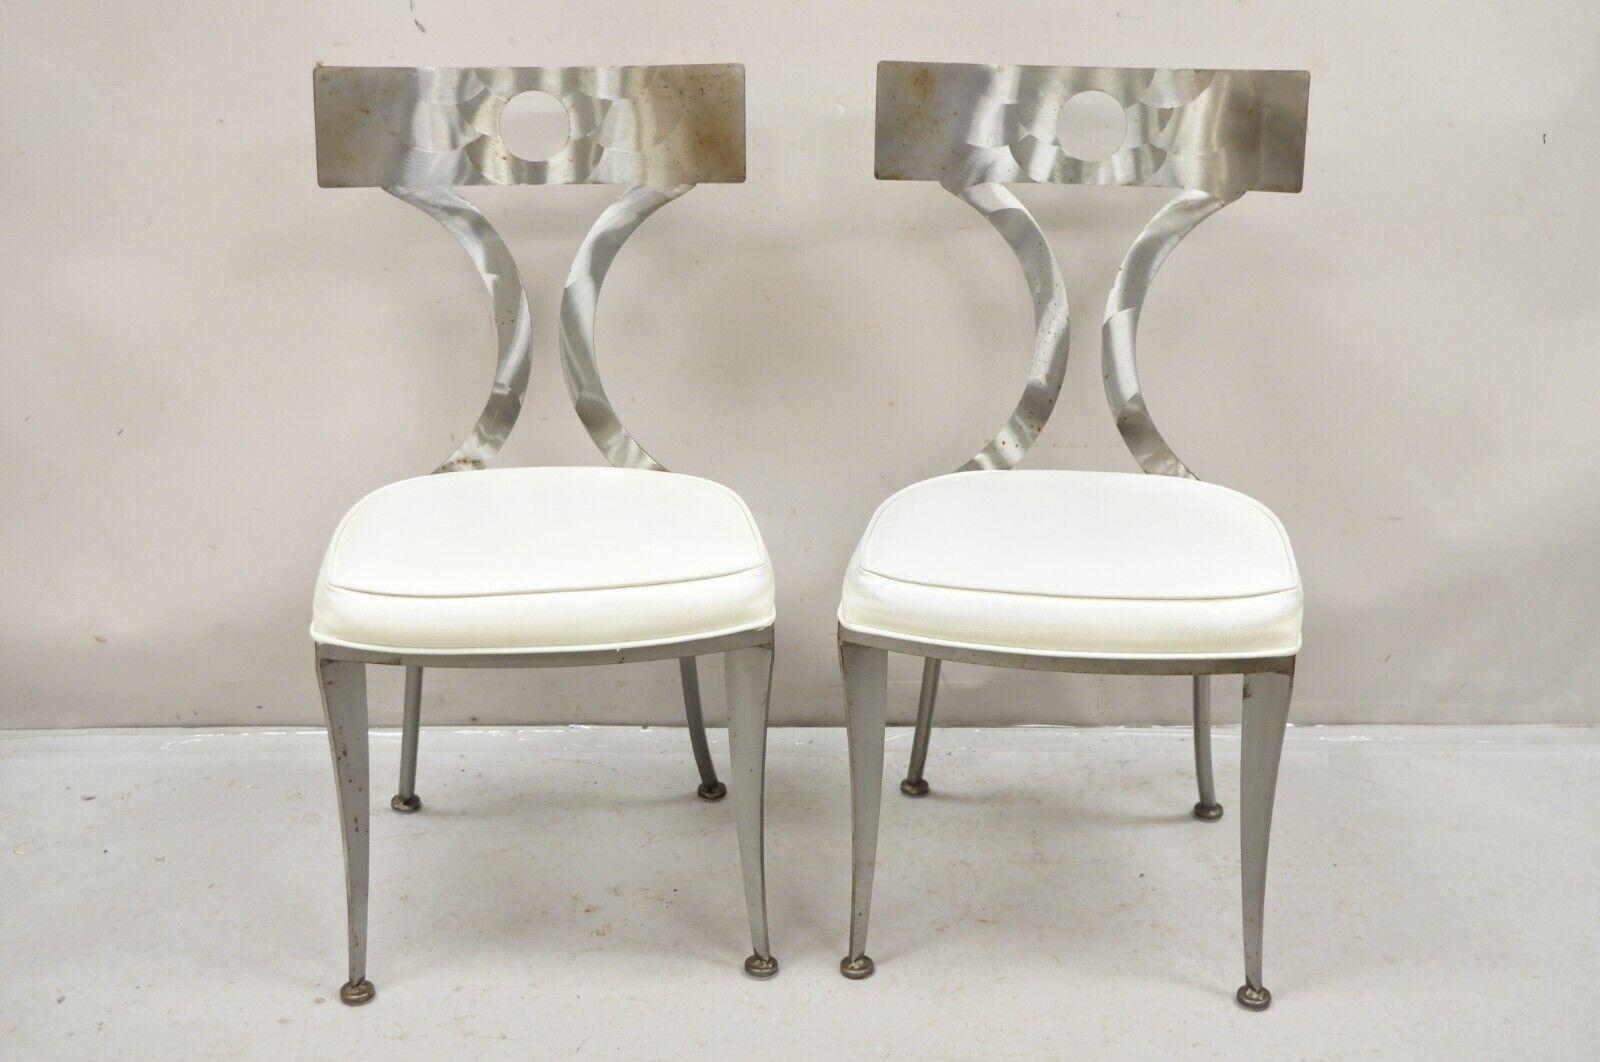 Pair of Vintage Shaver Howard Brushed Steel Metal Modern Regency Style Side Chairs. Item features angled Klismos saber legs, sculptural backs, white vinyl upholstery, original labels, great style and form. Circa Late 20th Century. Measurements: